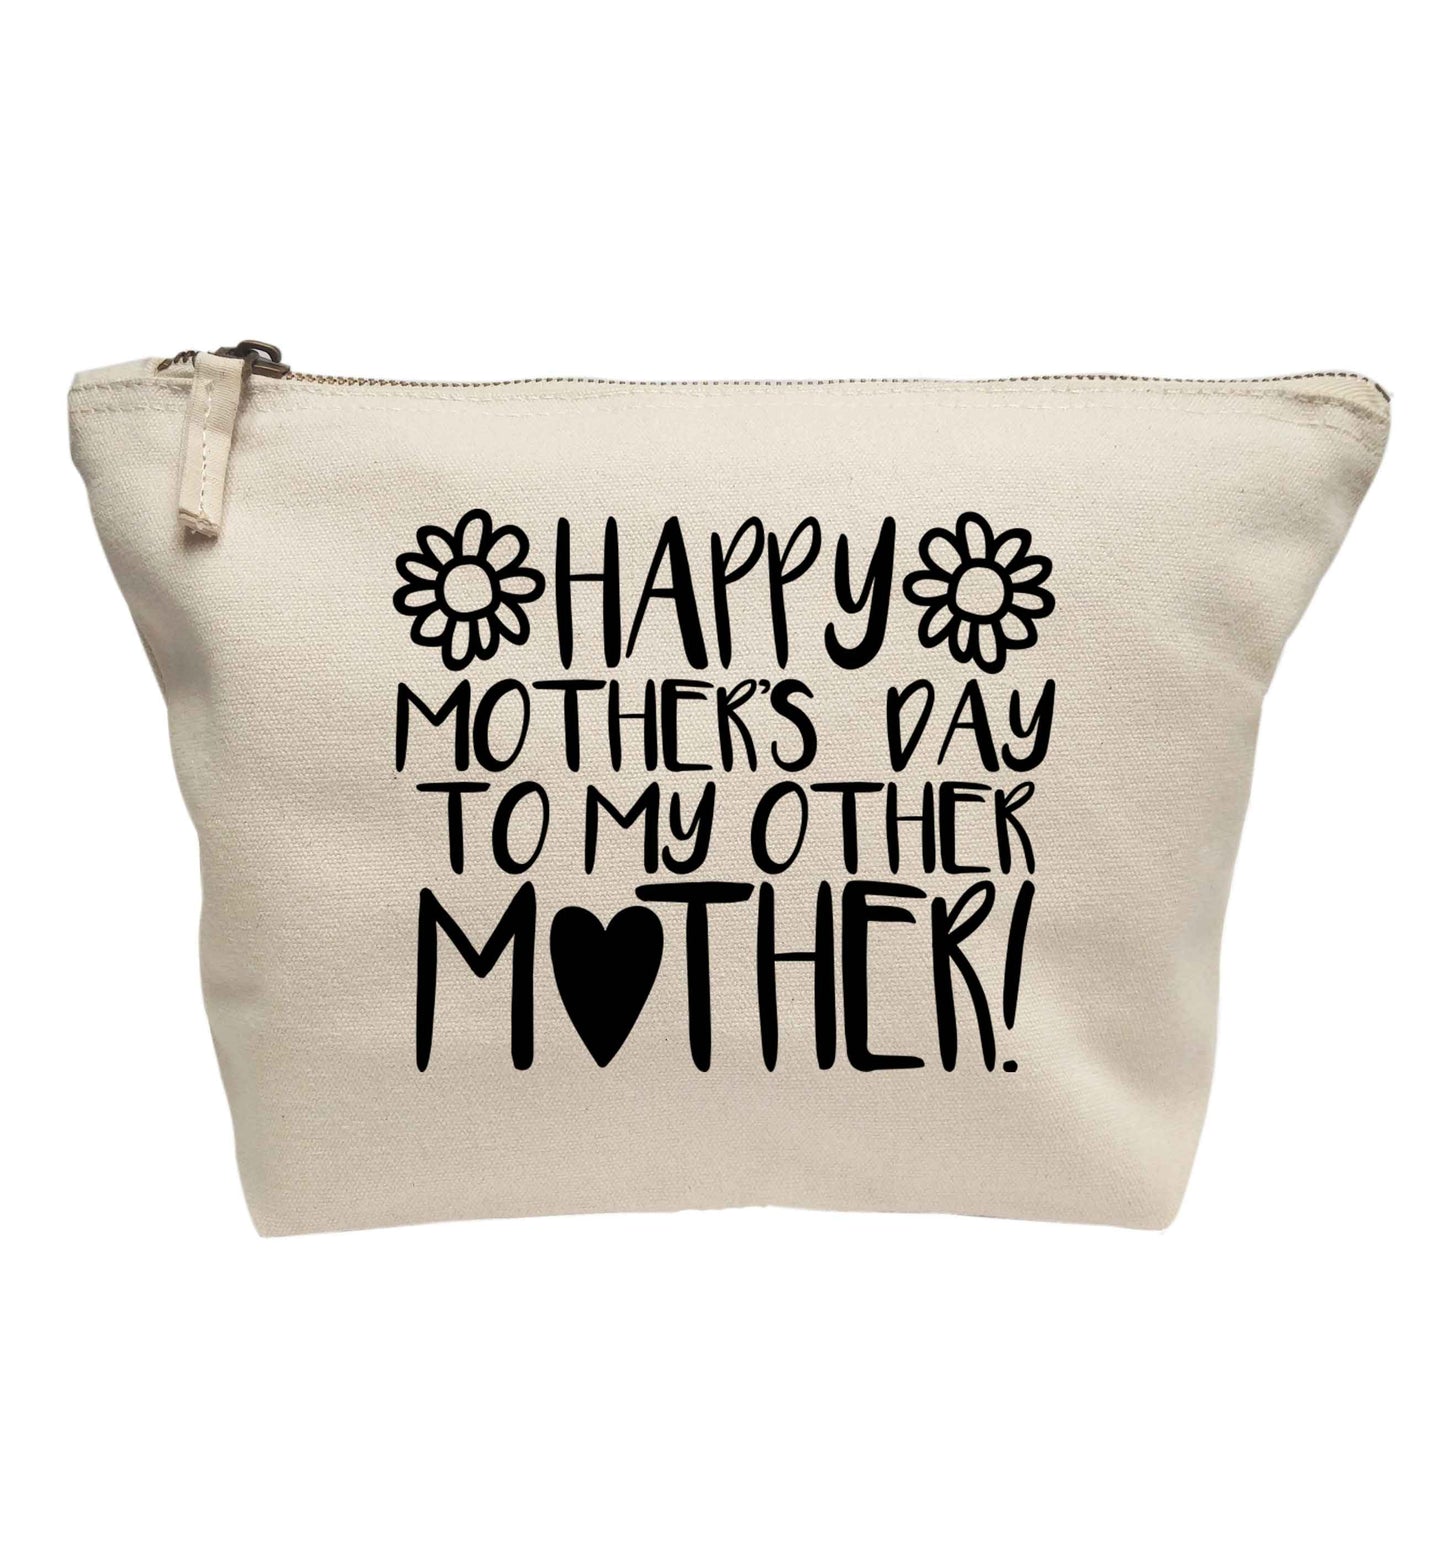 Happy mother's day to my other mother | Makeup / wash bag